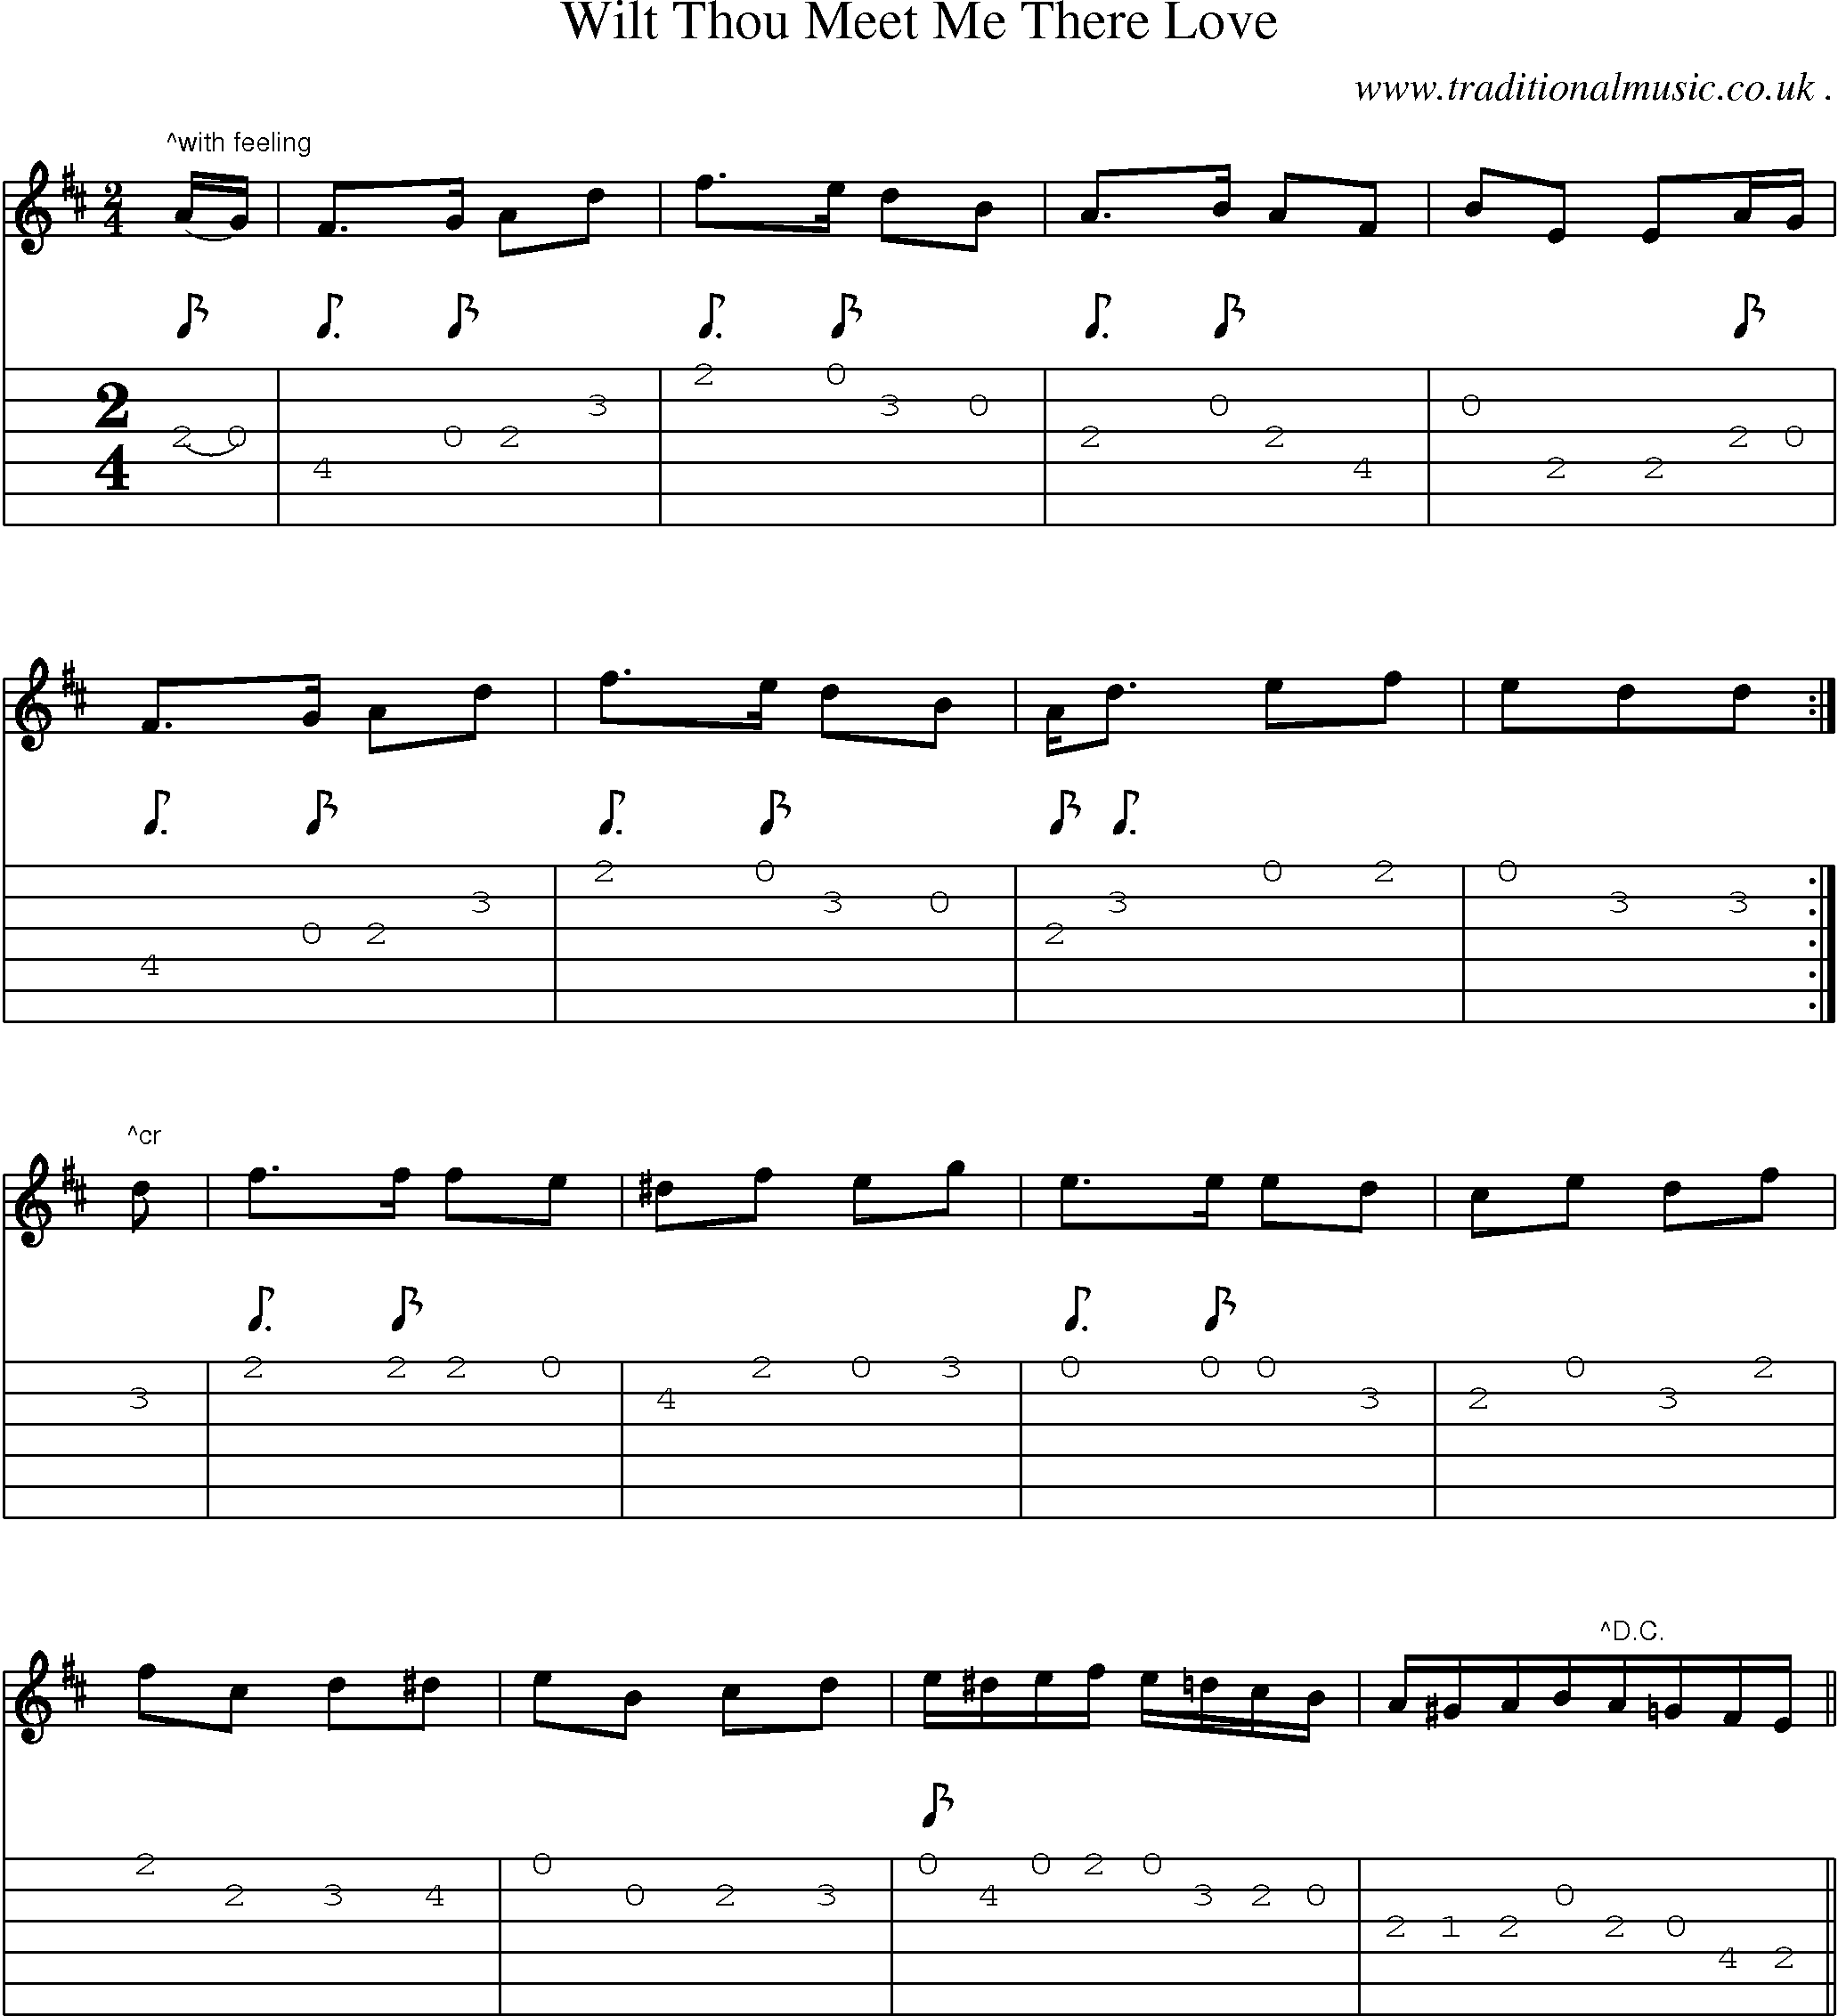 Sheet-Music and Guitar Tabs for Wilt Thou Meet Me There Love